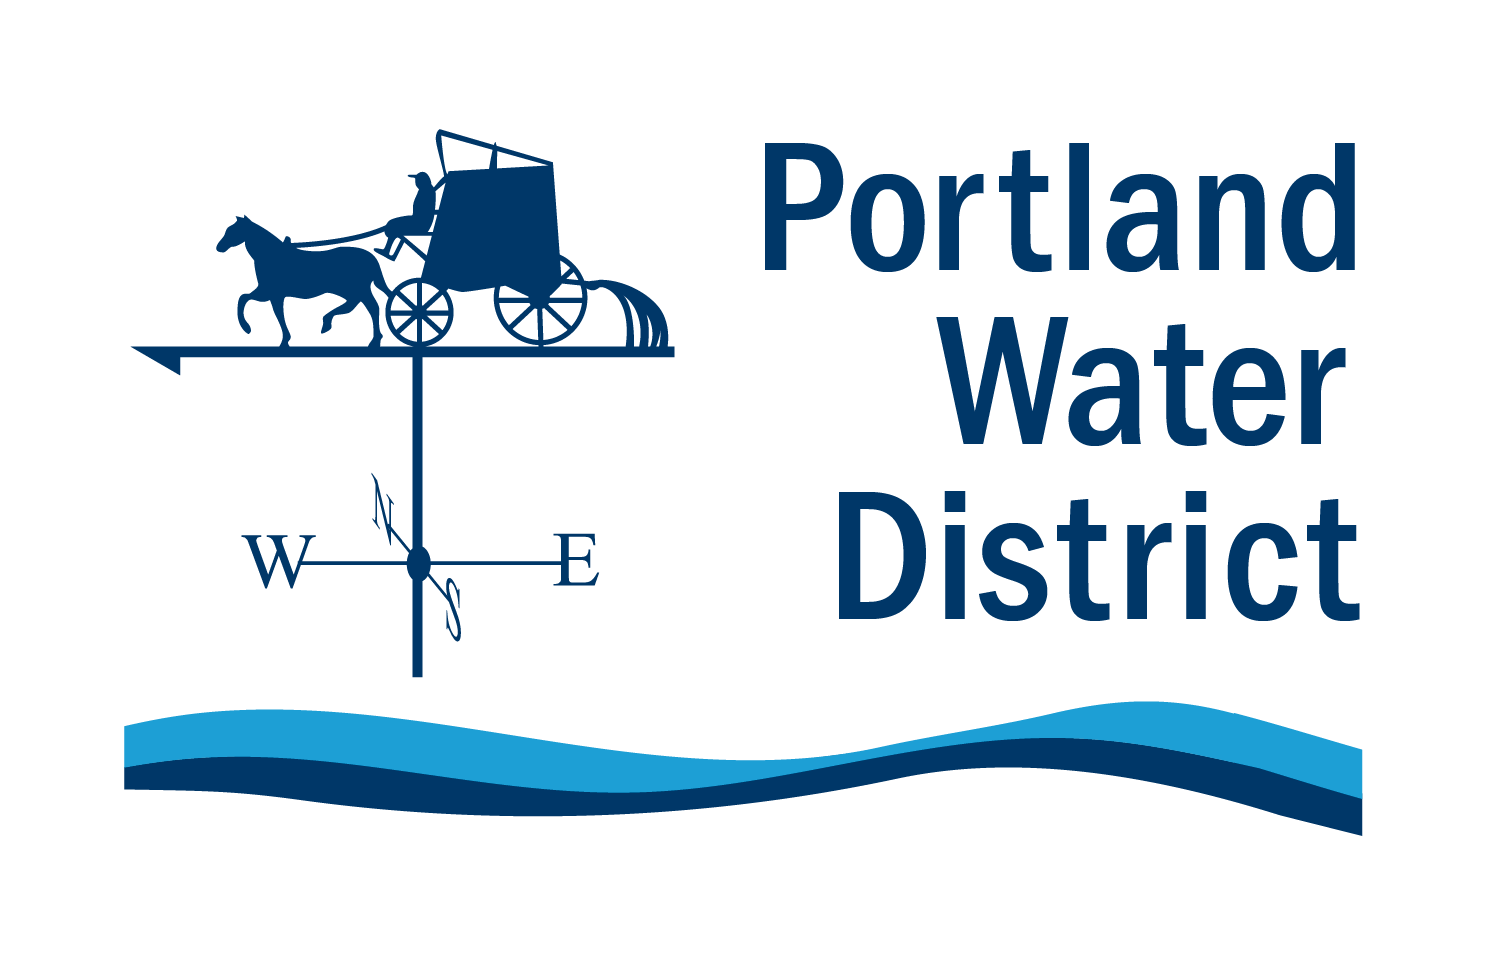 Portland Water District logo - a horse and cart weathervane of a field of blue